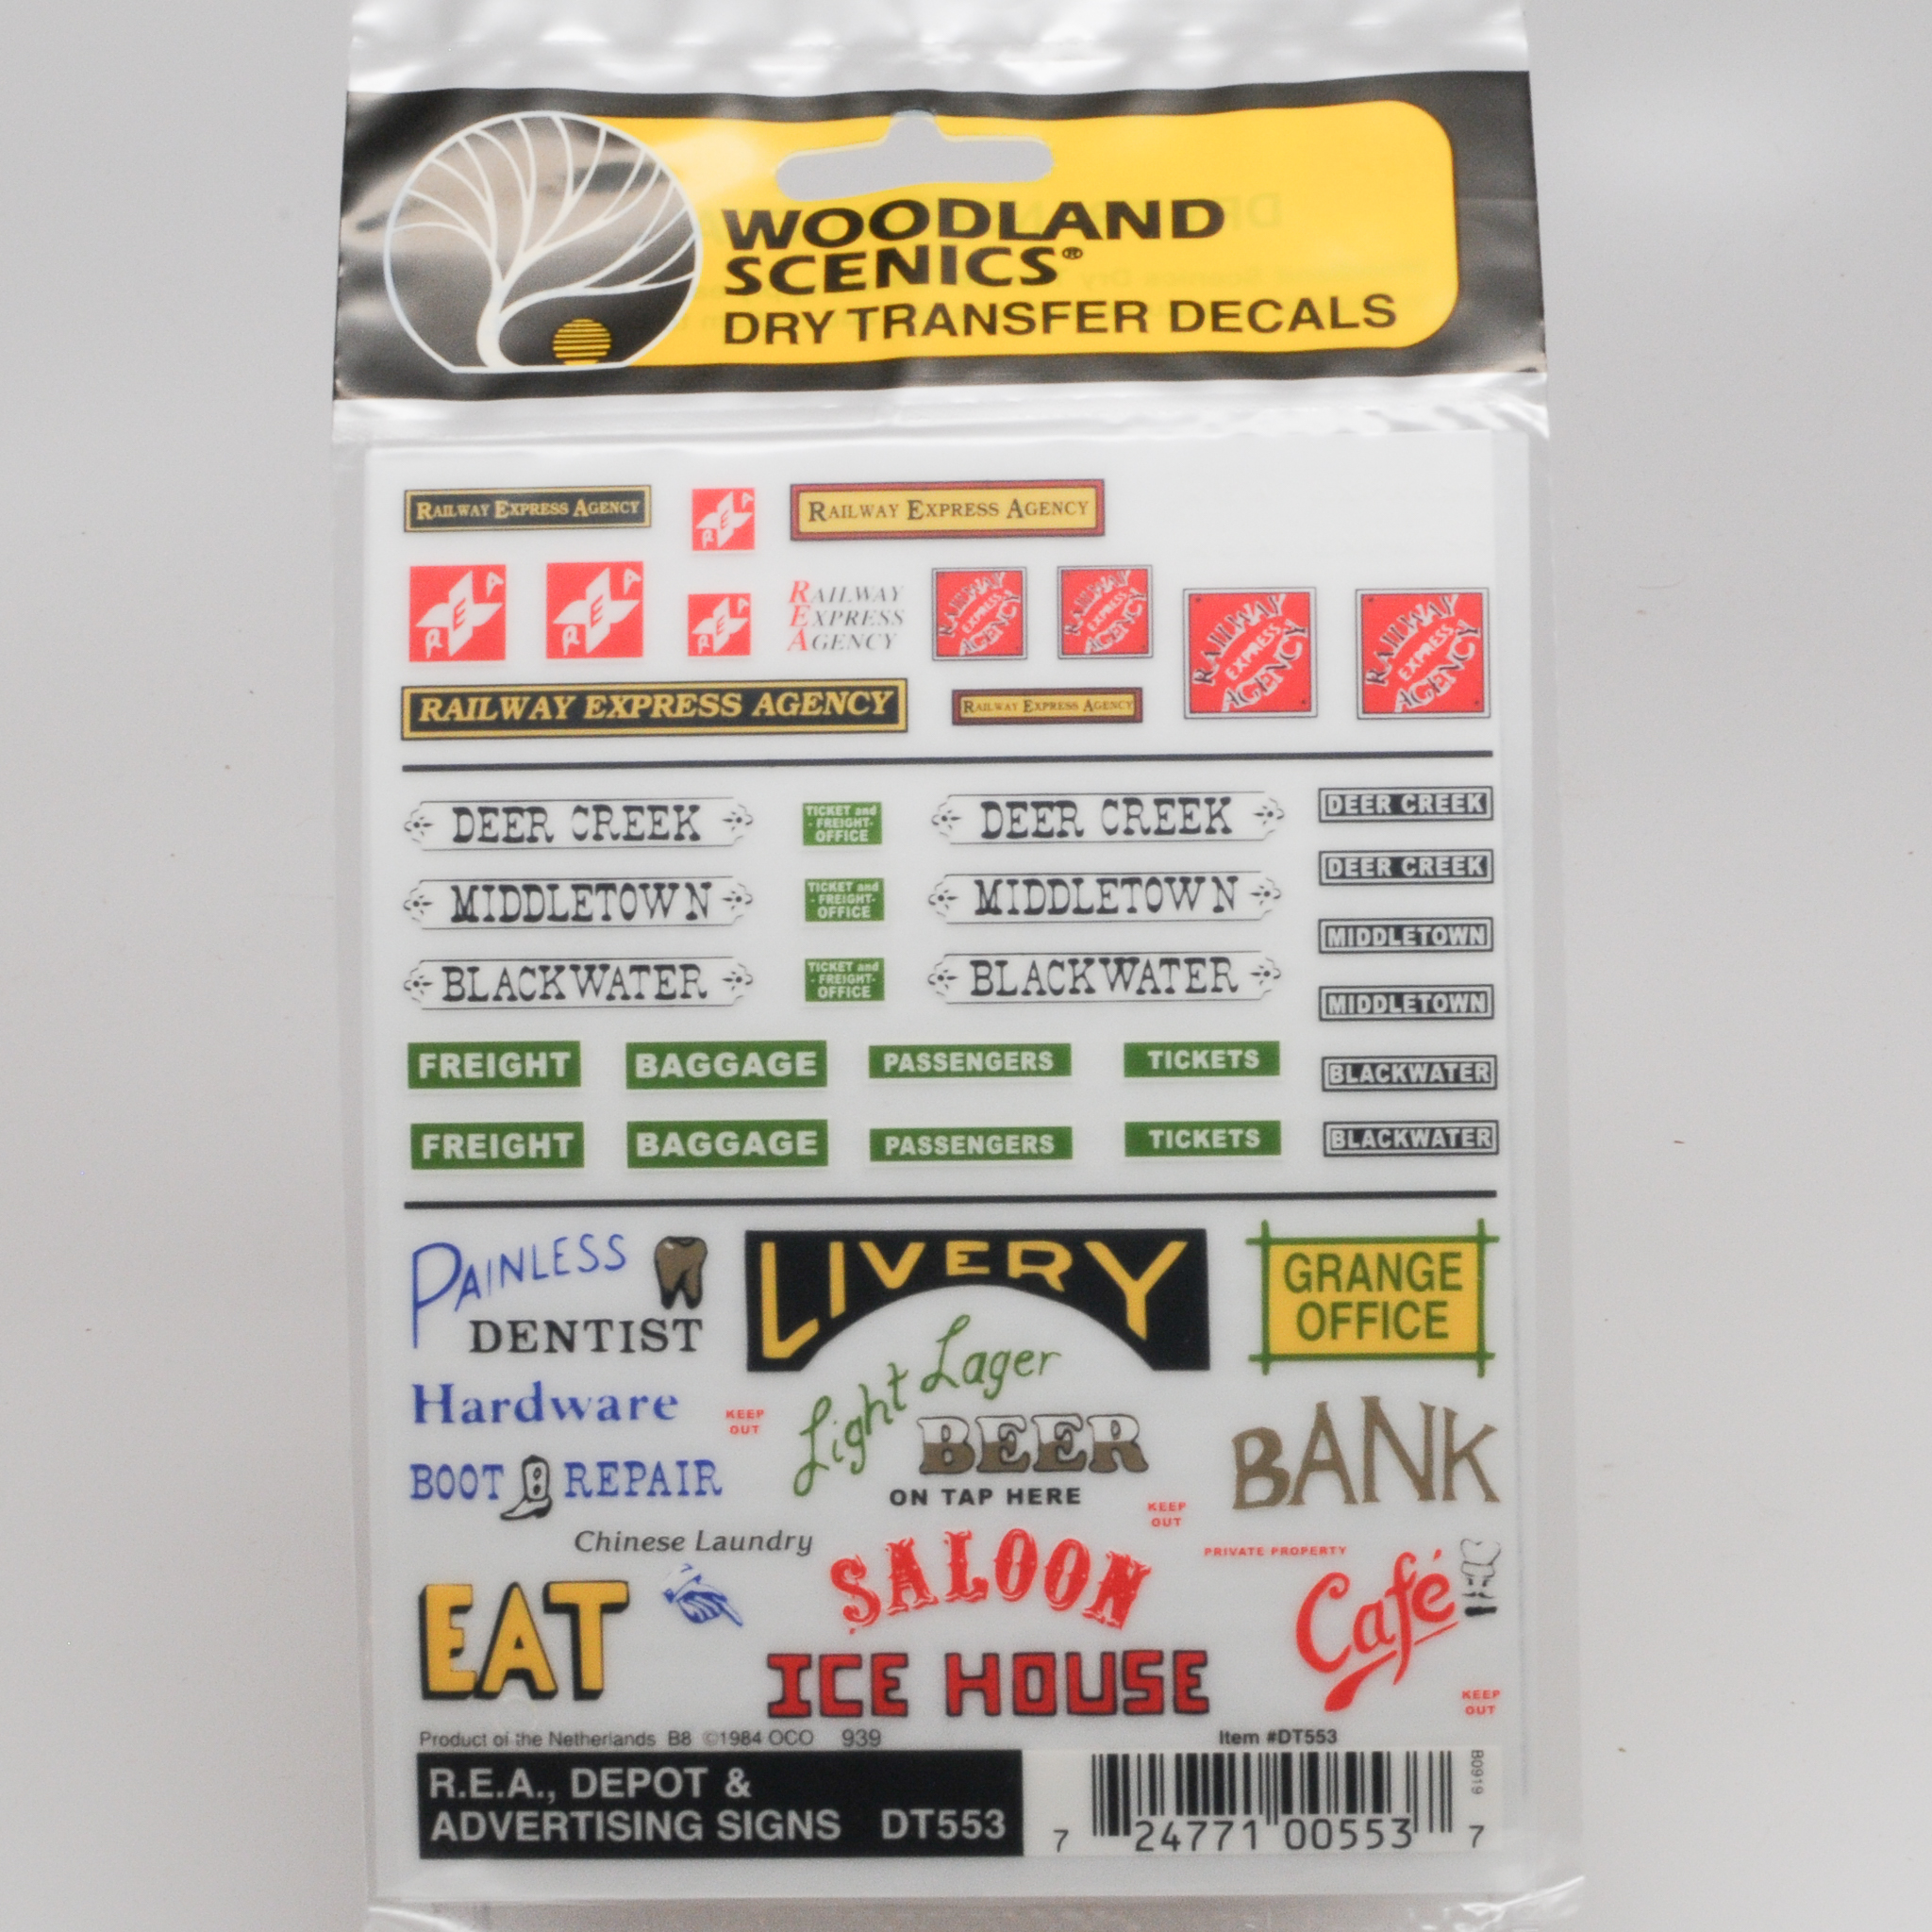 Woodland+Scenics+Dry+Transfer+Decals+R.E.A.%2C+Depot+and+Advertising+Signs picture 1